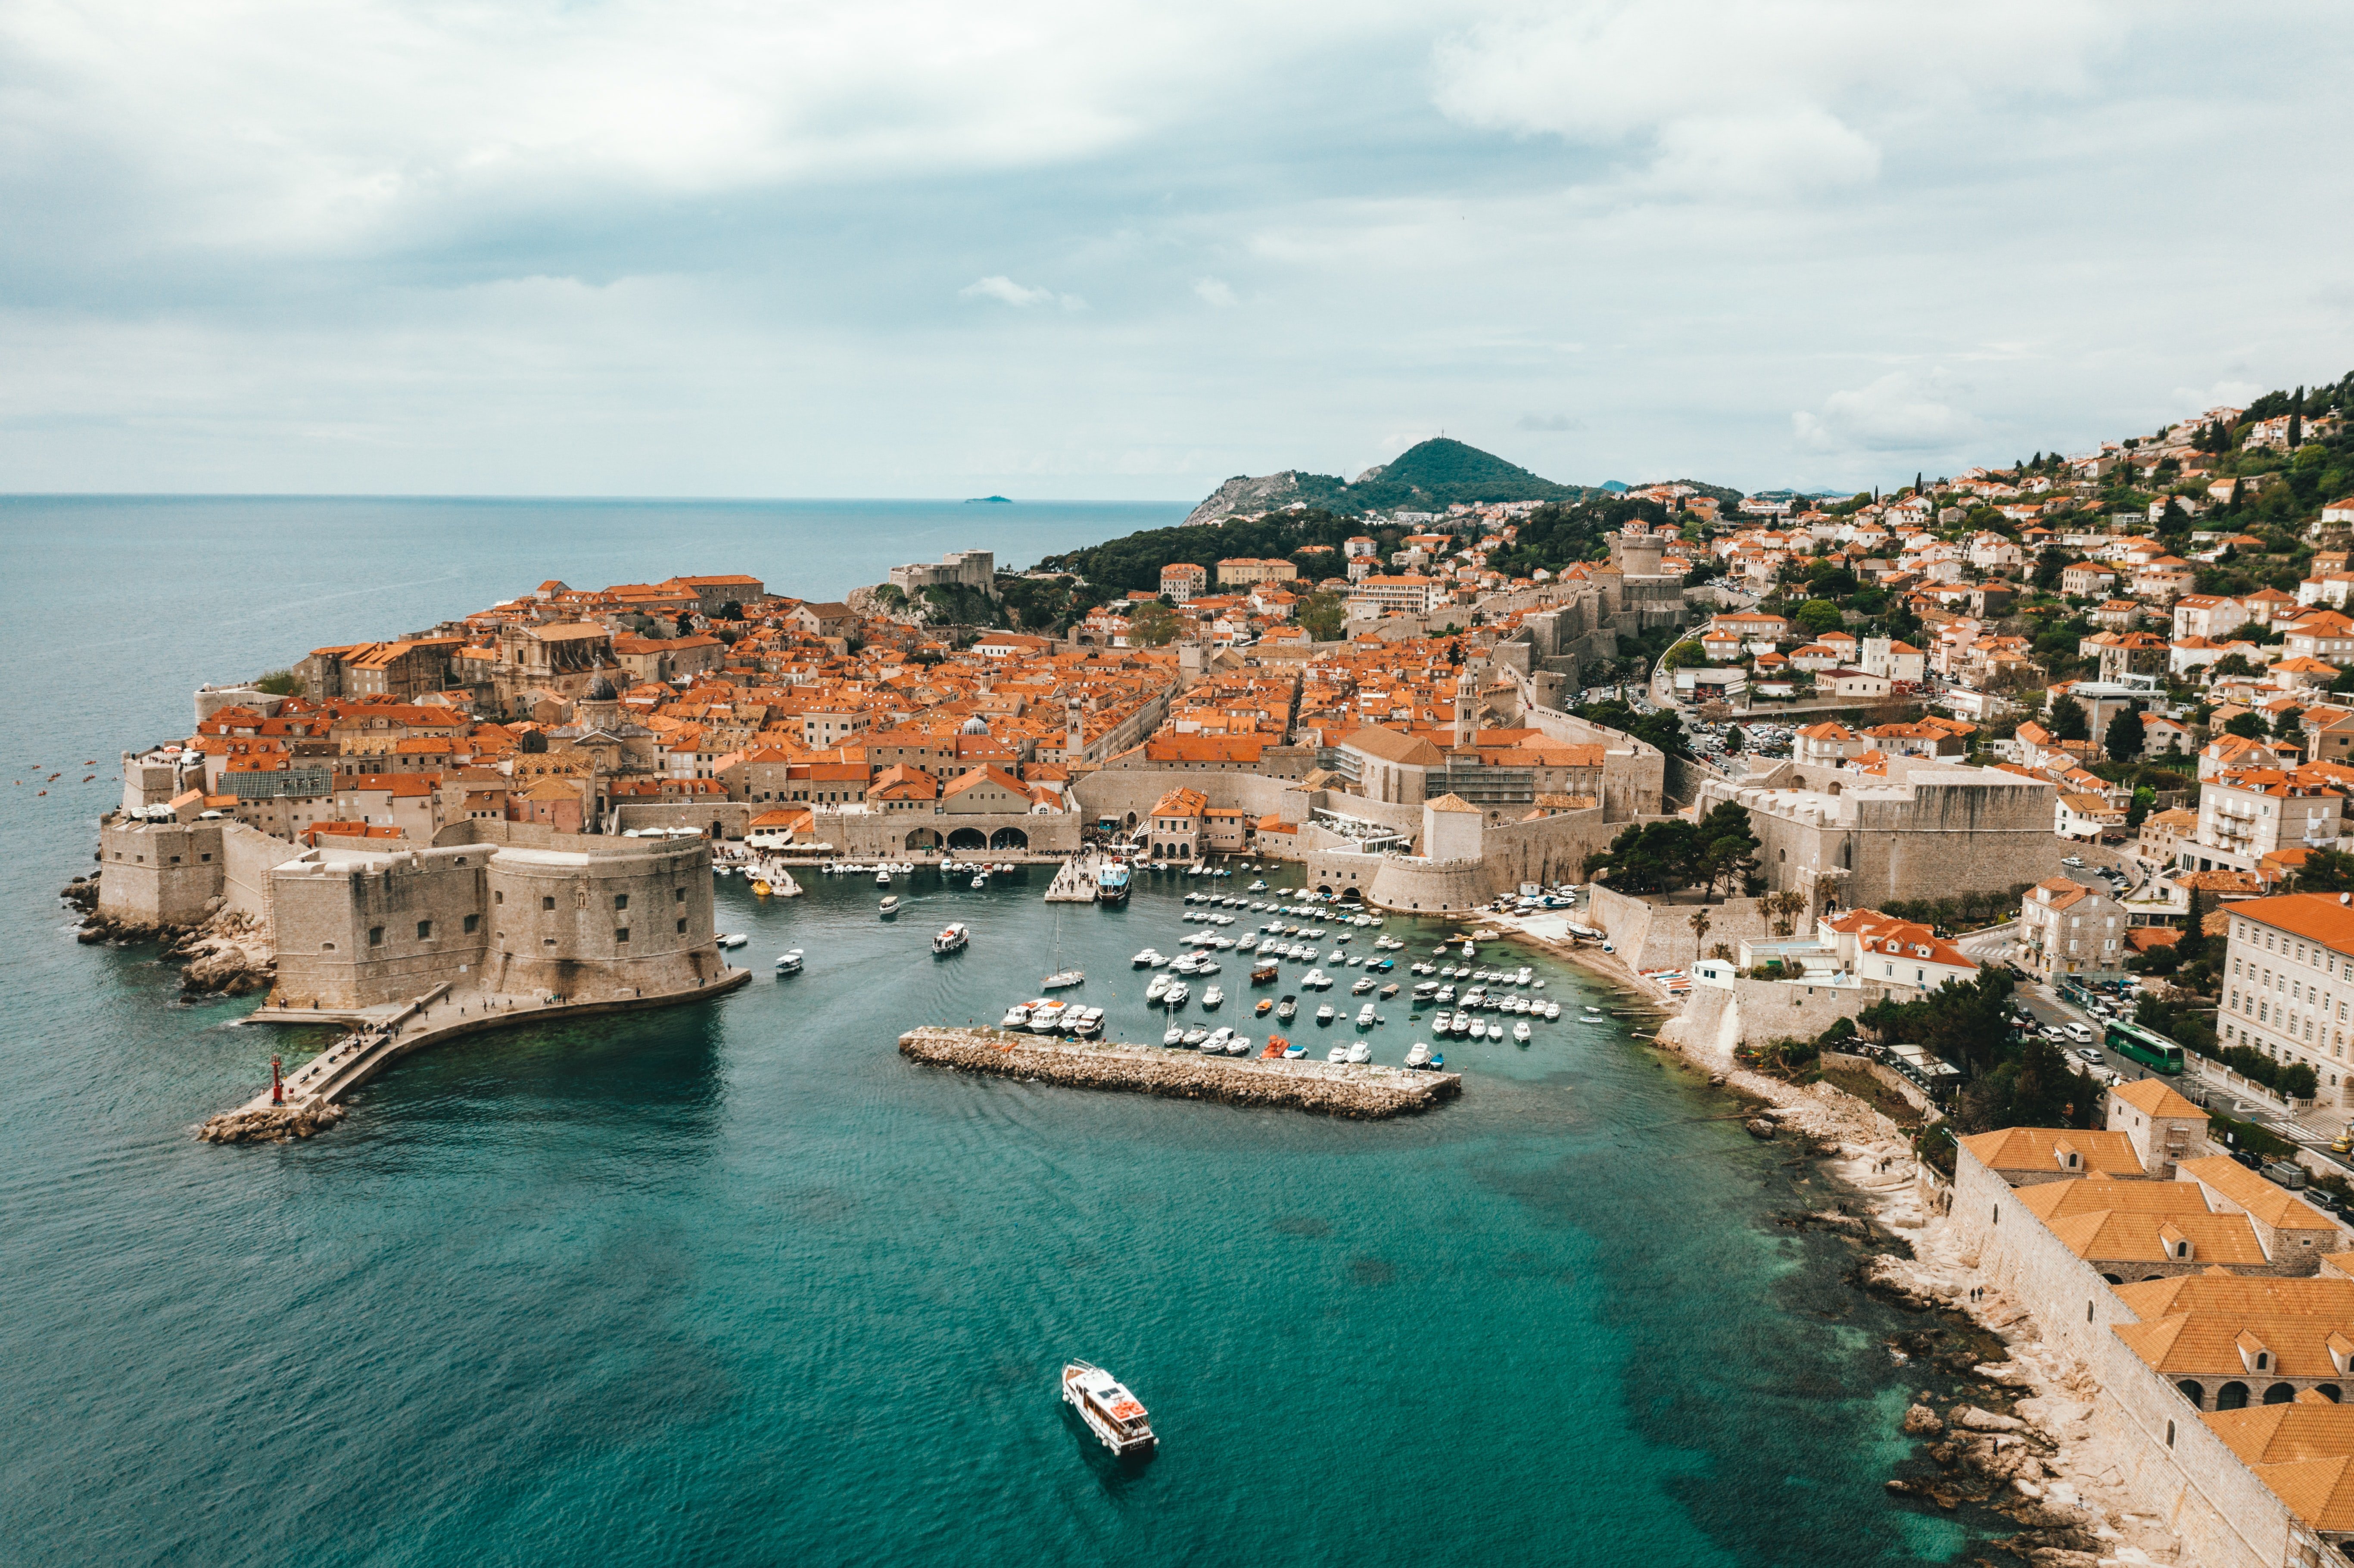 A view of Dubrovnik in Croatia by the waters and is a covid alternative for the most popular destination.